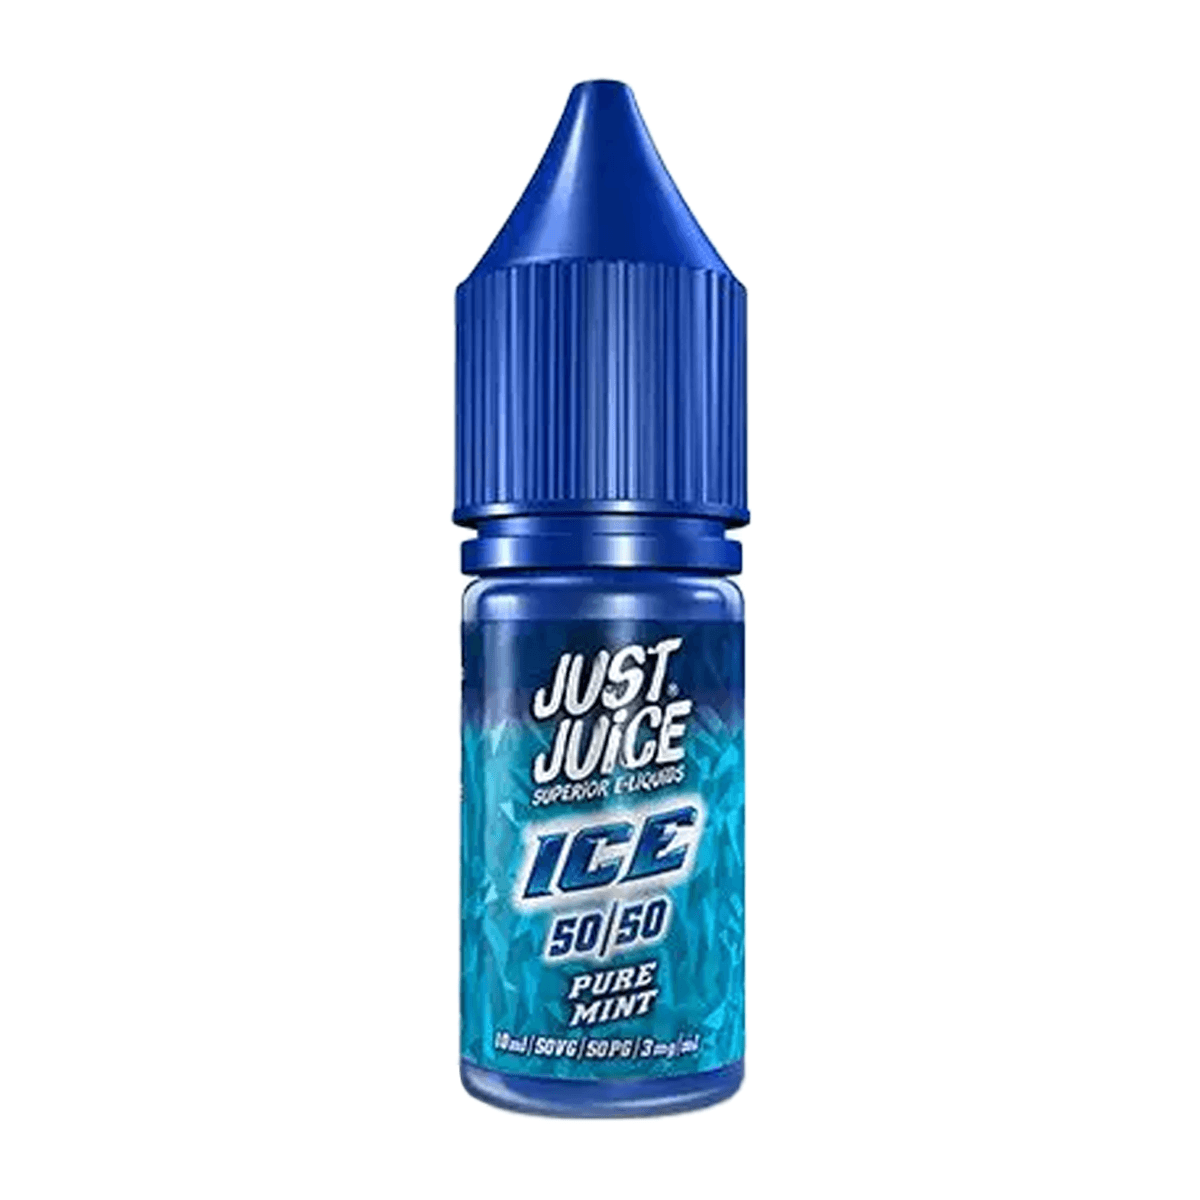 Pure Mint Ice 50/50 E-Liquid By Just Juice